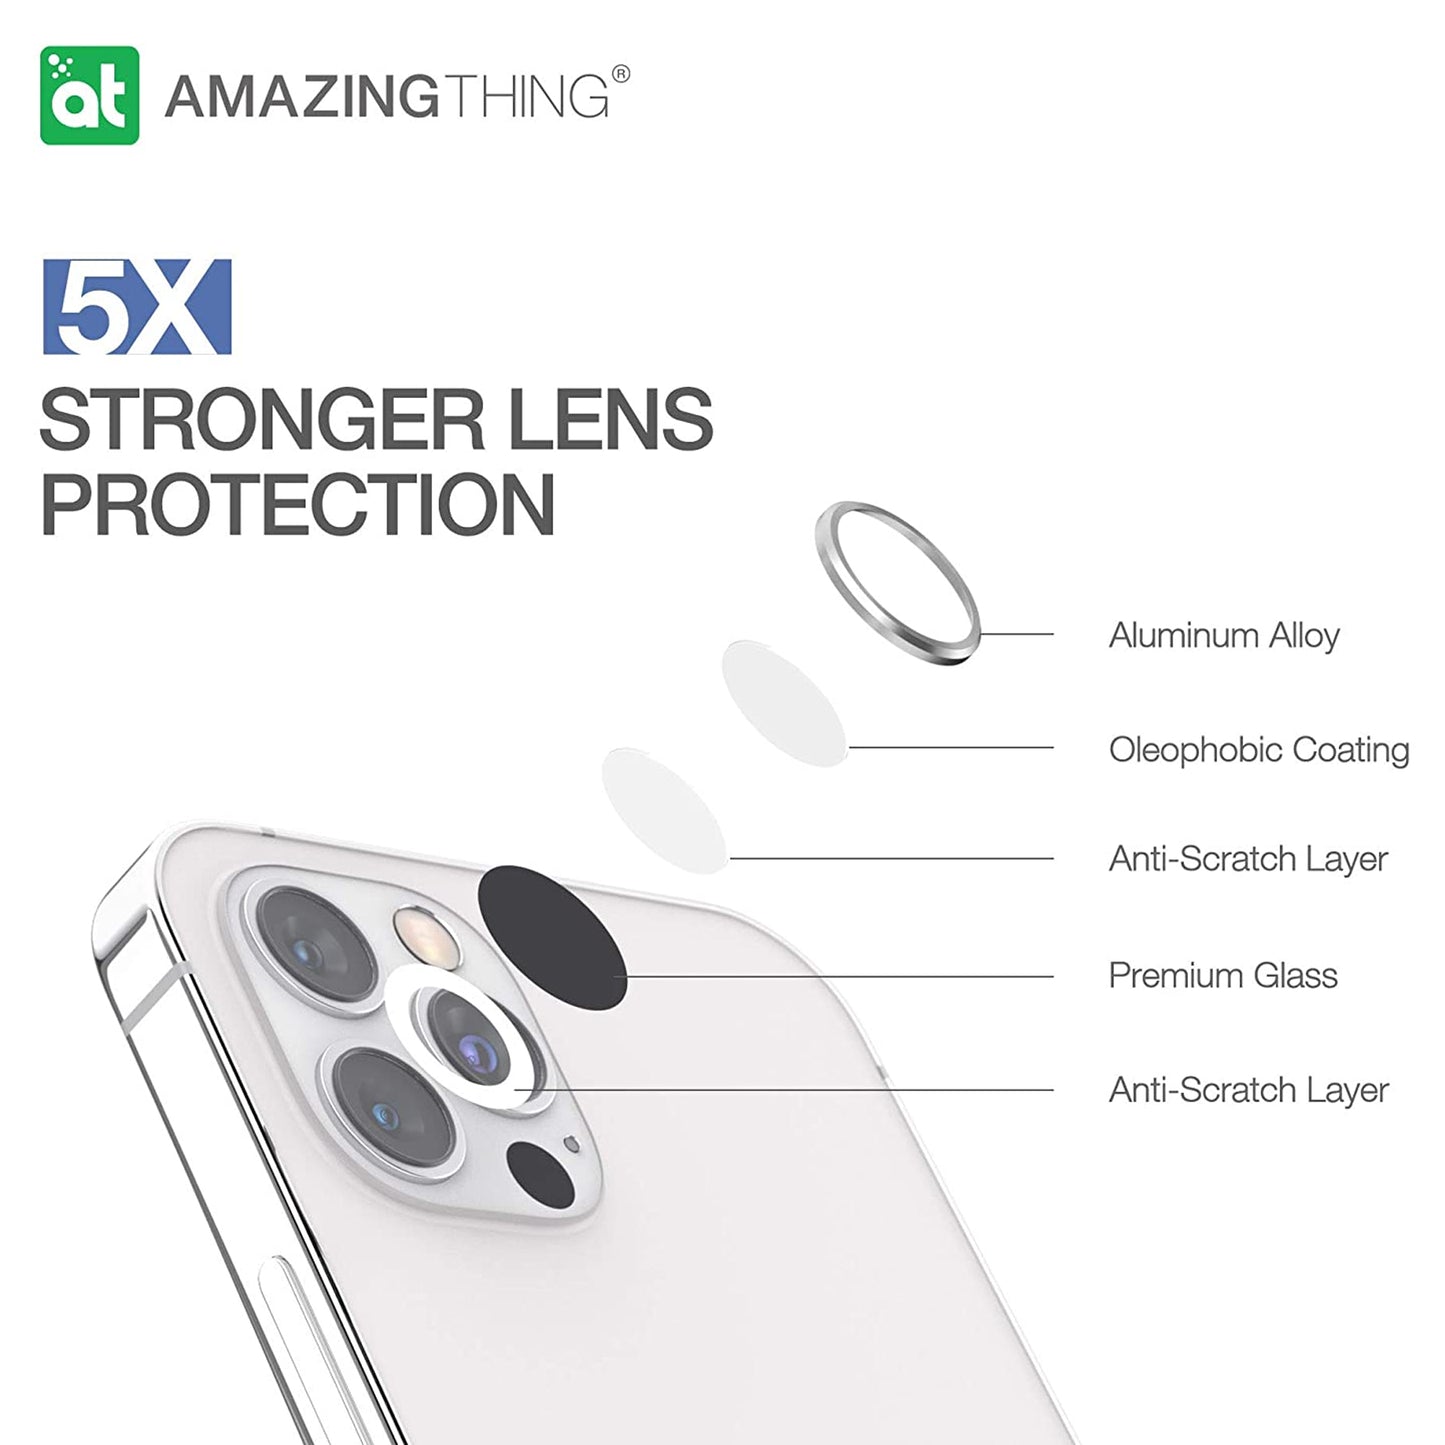 AMAZINGthing SUPREME AR 3D LensGlass Protector for iPhone 13 - 13 Mini 5G ( Two Lens ) - Black (Barcode: 4892878069410 )